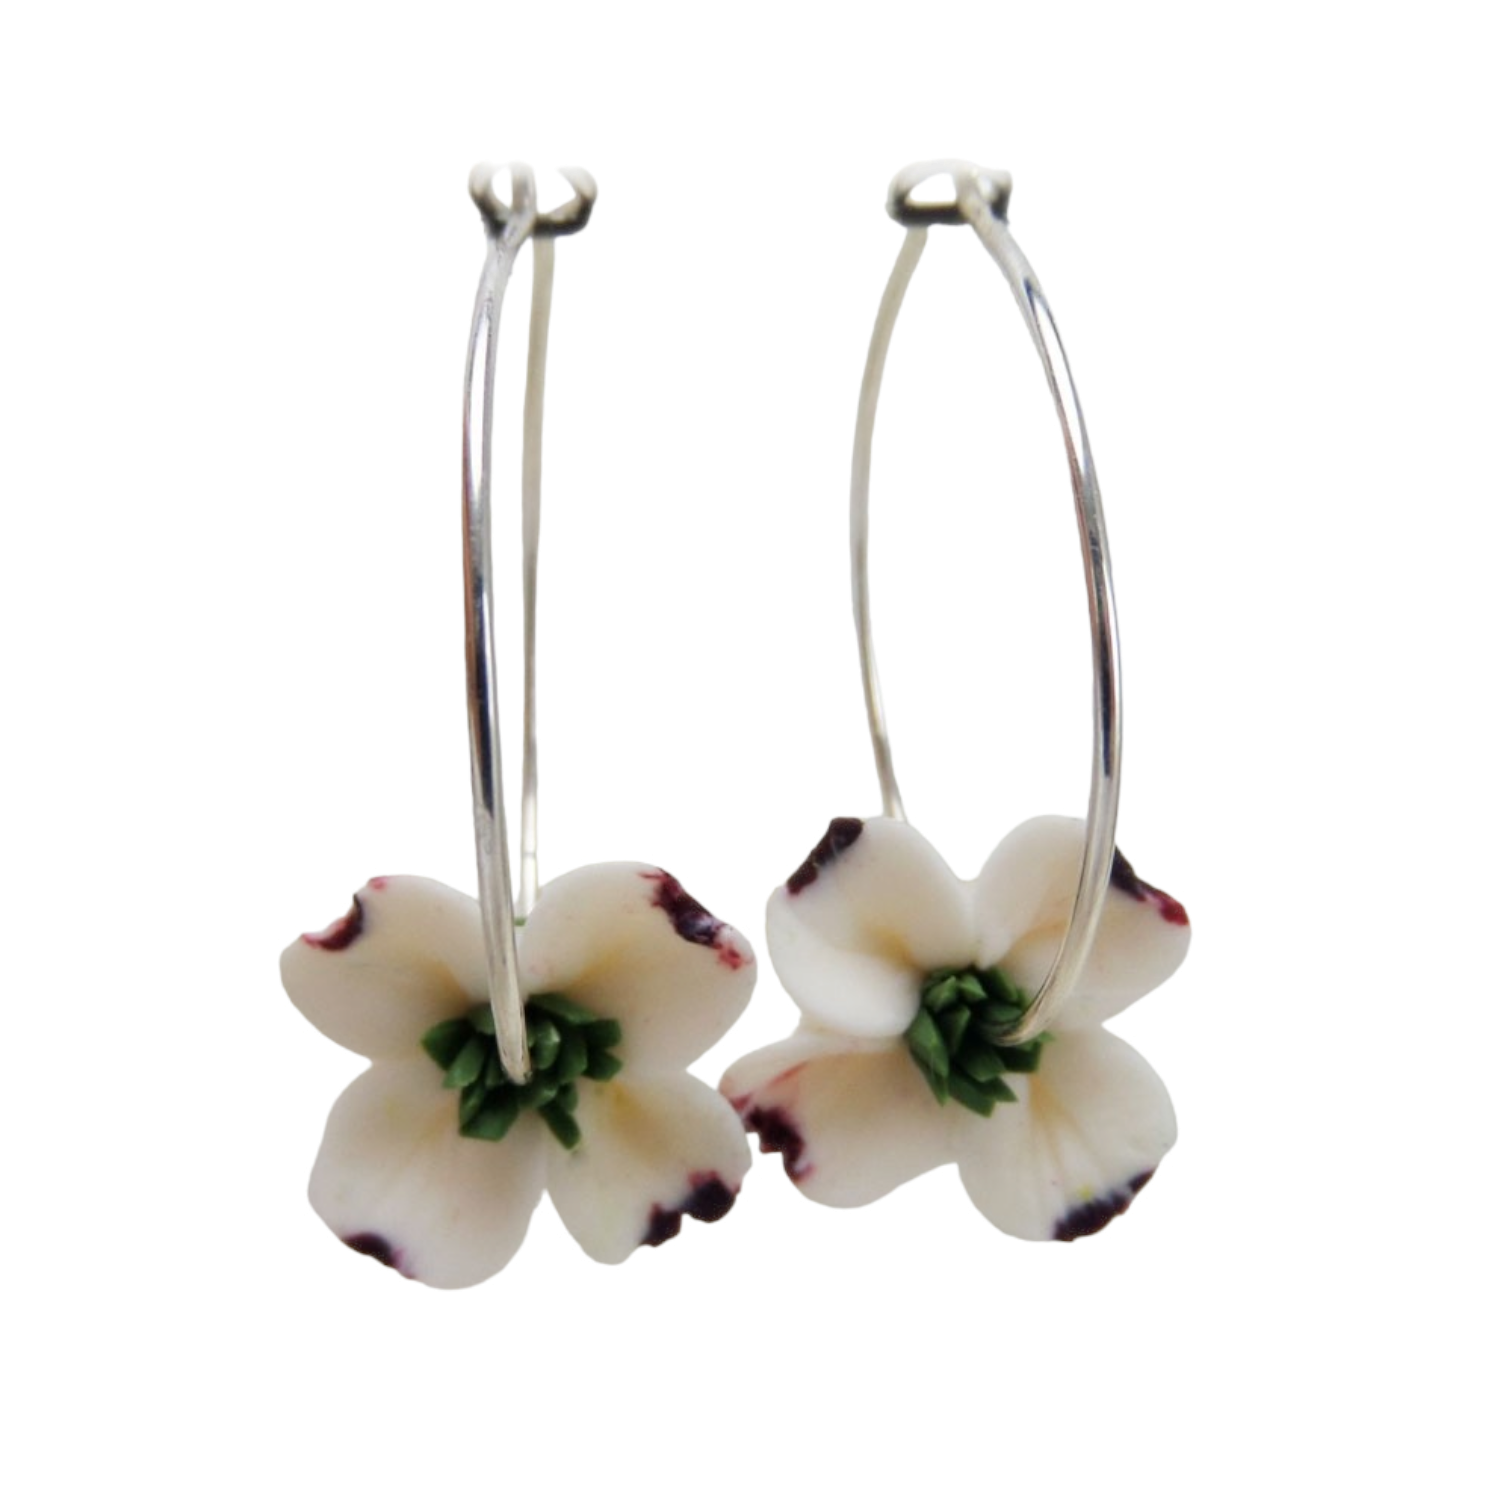 Dogwood Flower Hair Pin Set of 2 - Style #659 Antique Silver